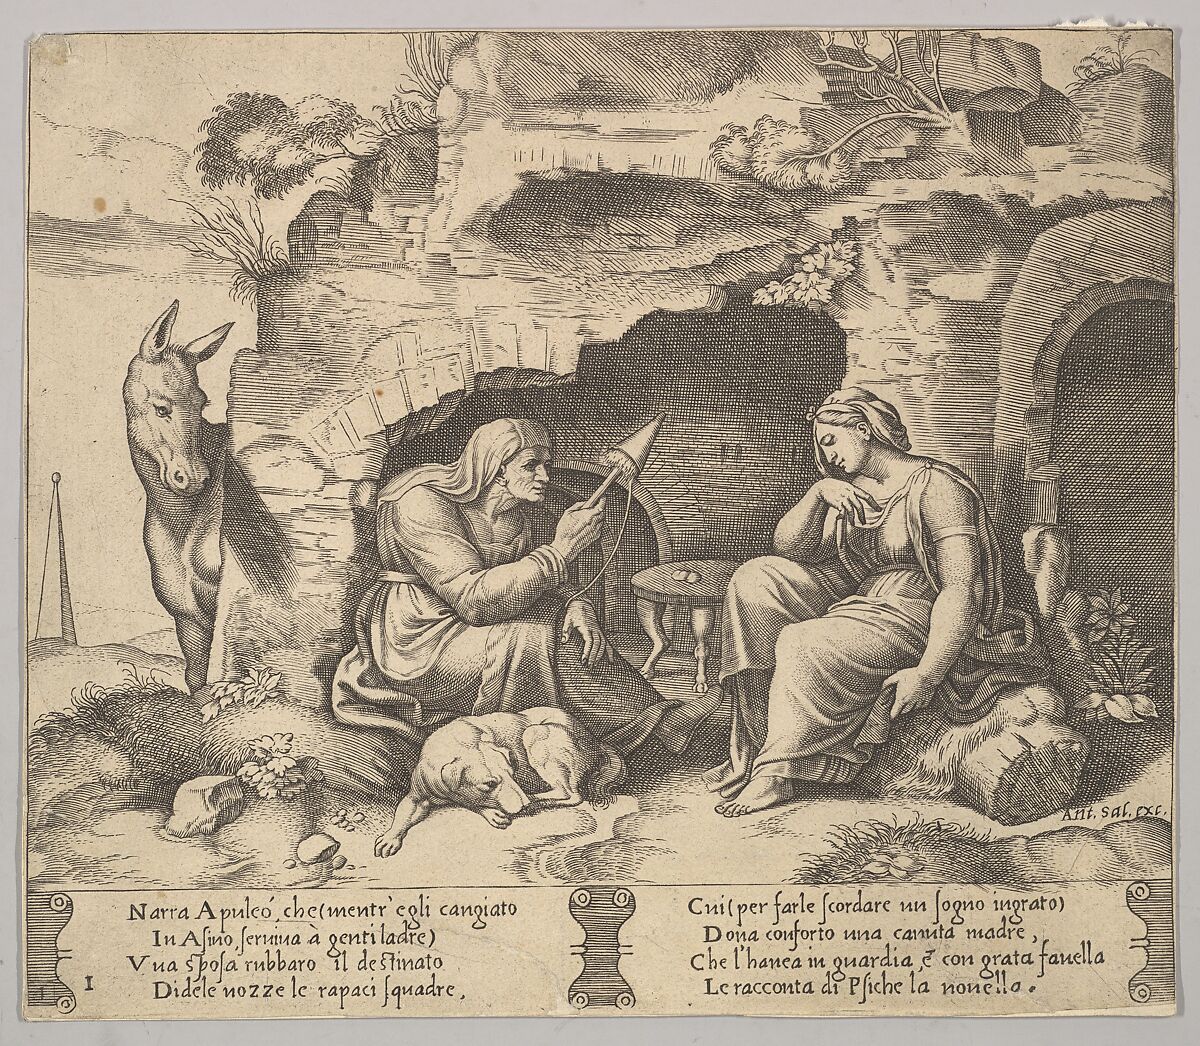 Plate 1: Apuleius changed into a donkey listening to the story told by the old woman spinning, Master of the Die (Italian, active Rome, ca. 1530–60), Engraving 